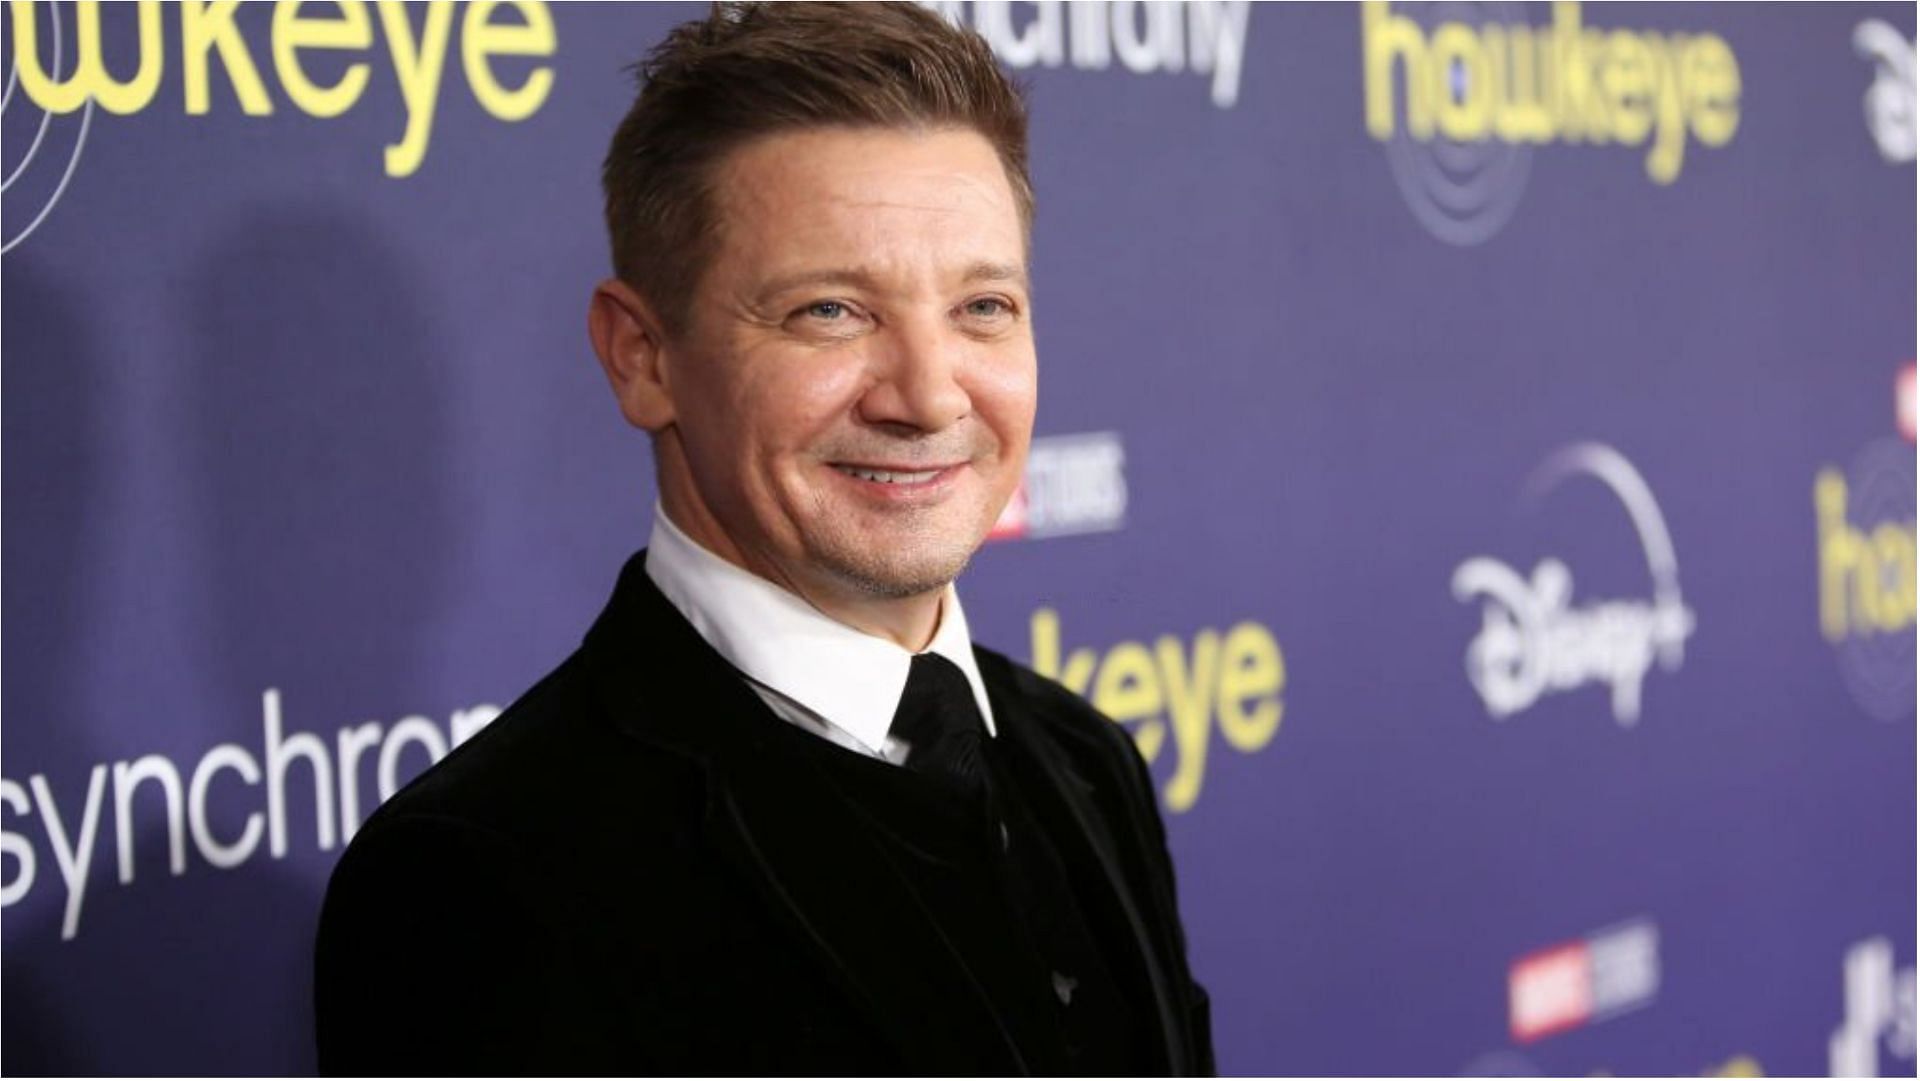 Jeremy Renner will appear next in Mayor of Kingstown Season 2 (Image via Jesse Grant/Getty Images)